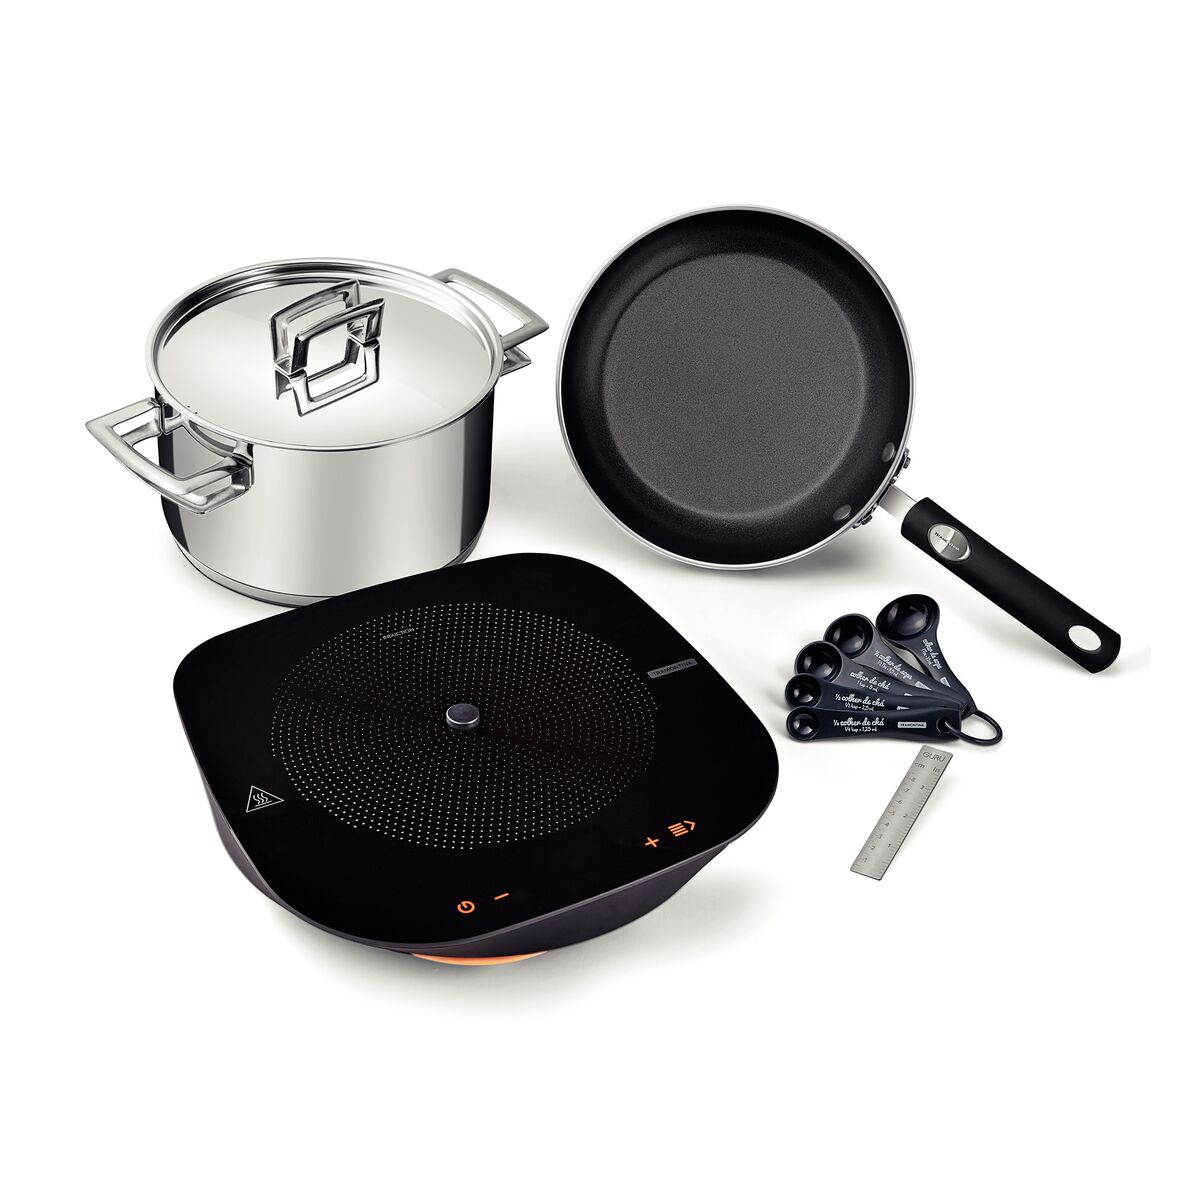 Connected Portable Induction Guru 127 V Cooktop